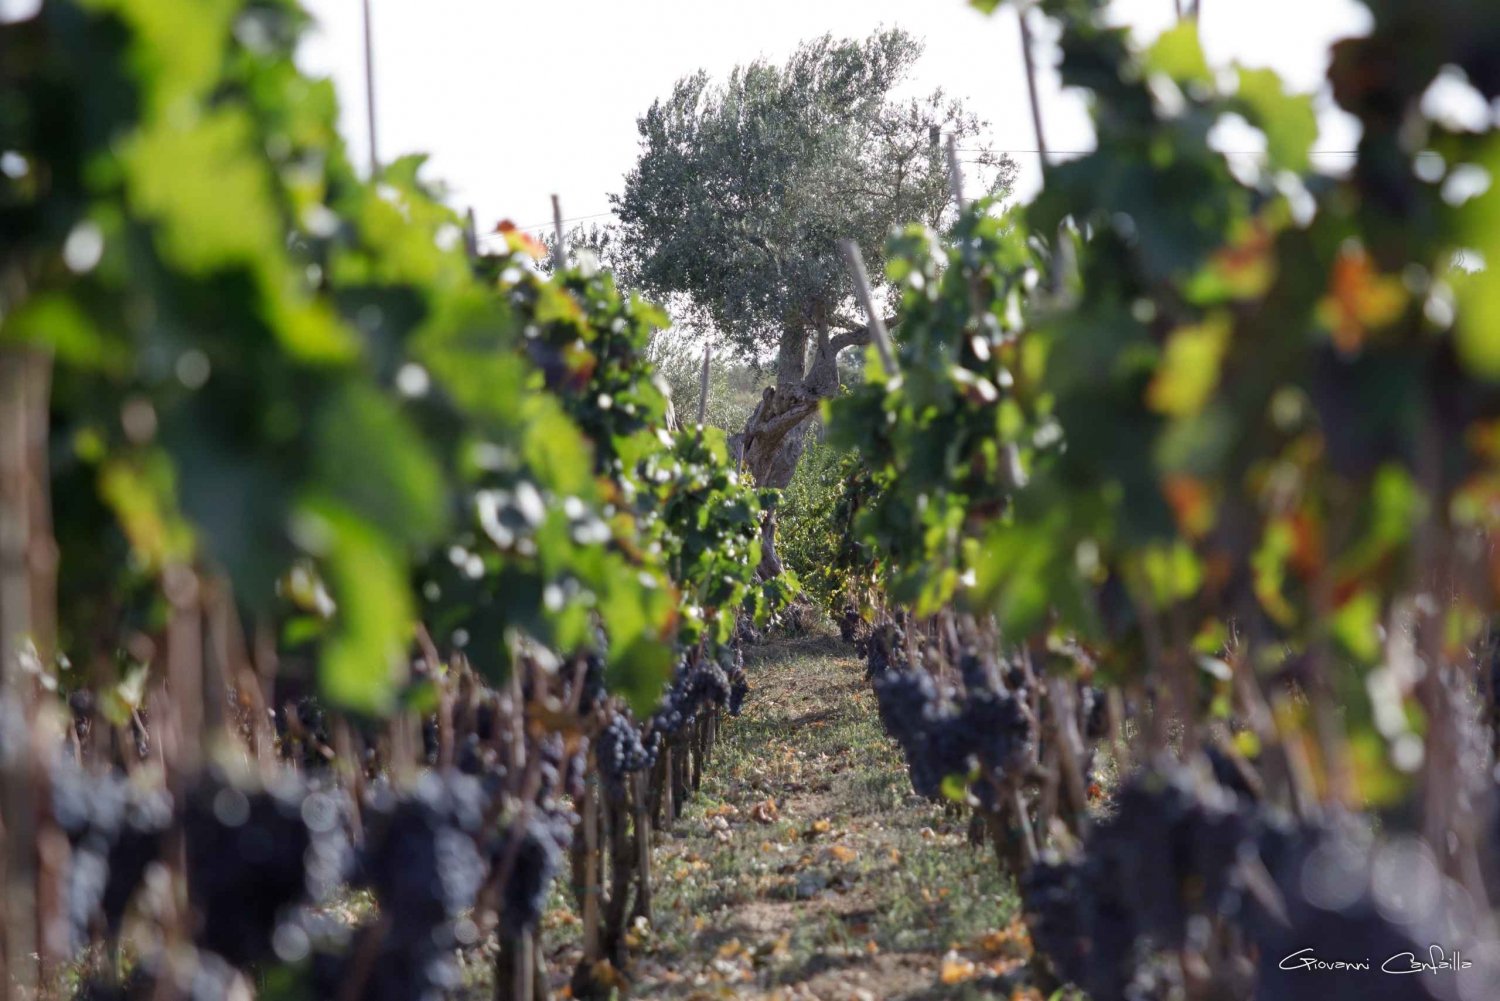 Walk among the rows of vineyards and wine tasting